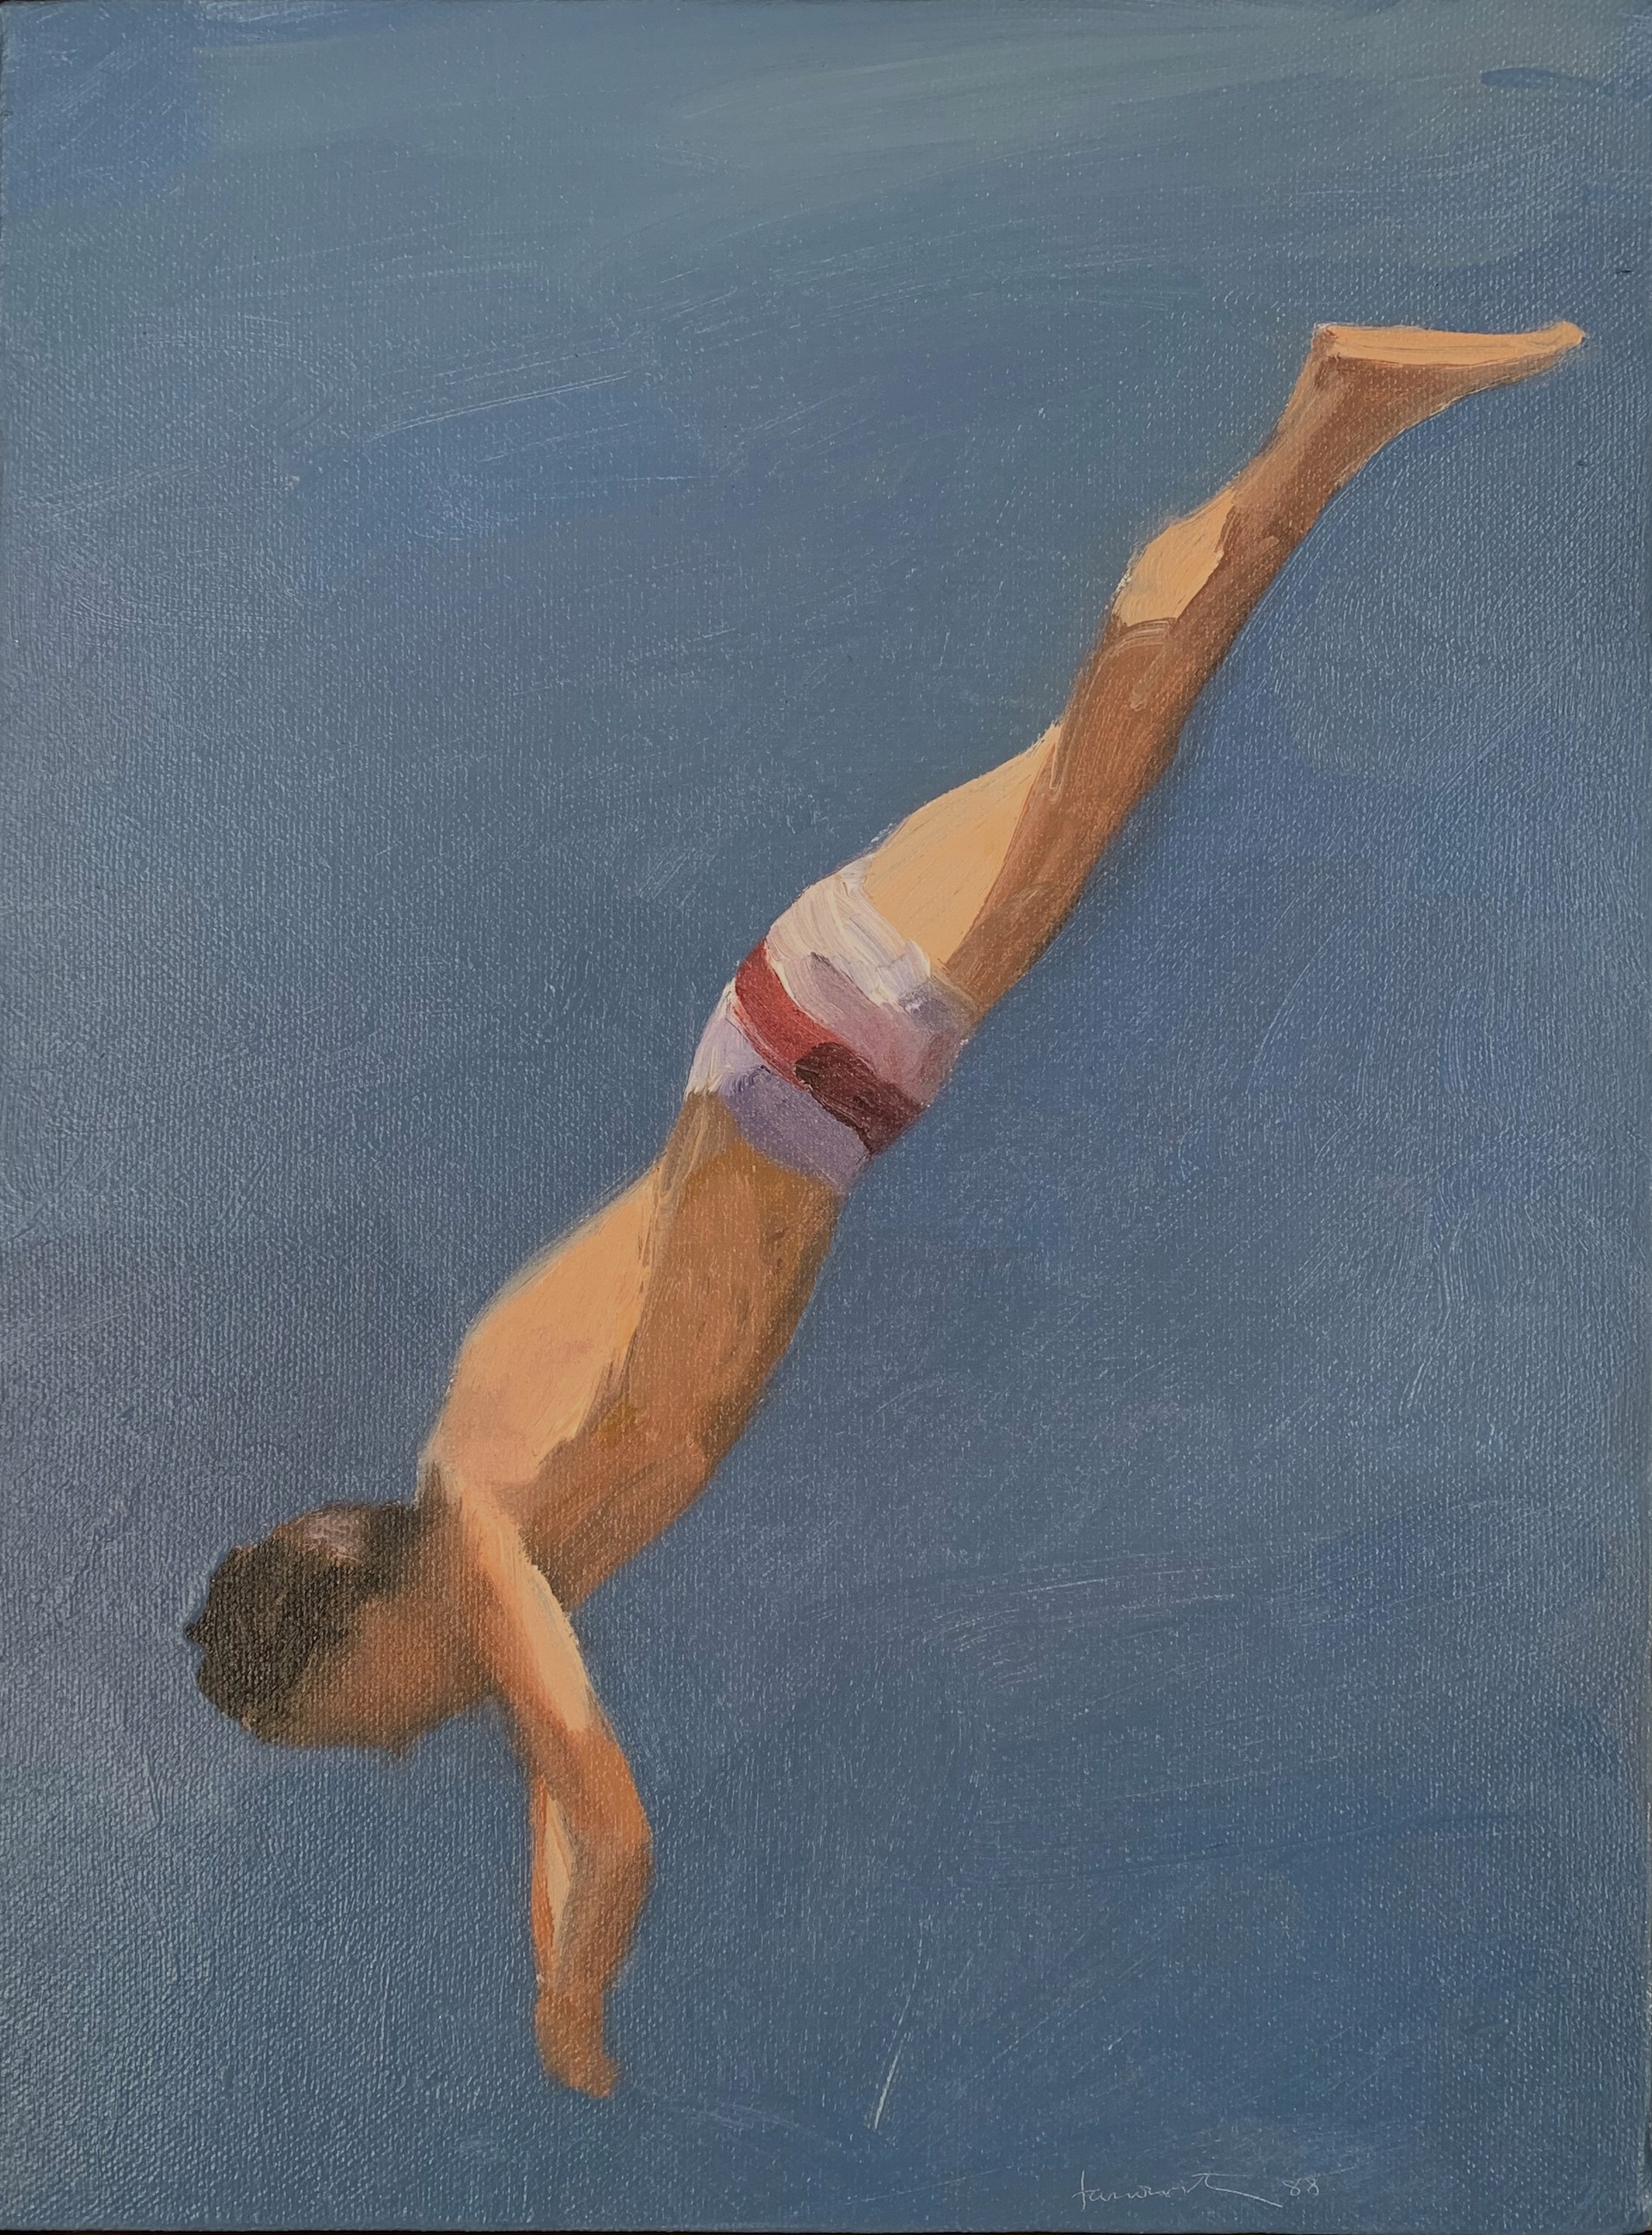 Quarry Jump: Hanging in Air by Joel Janowitz